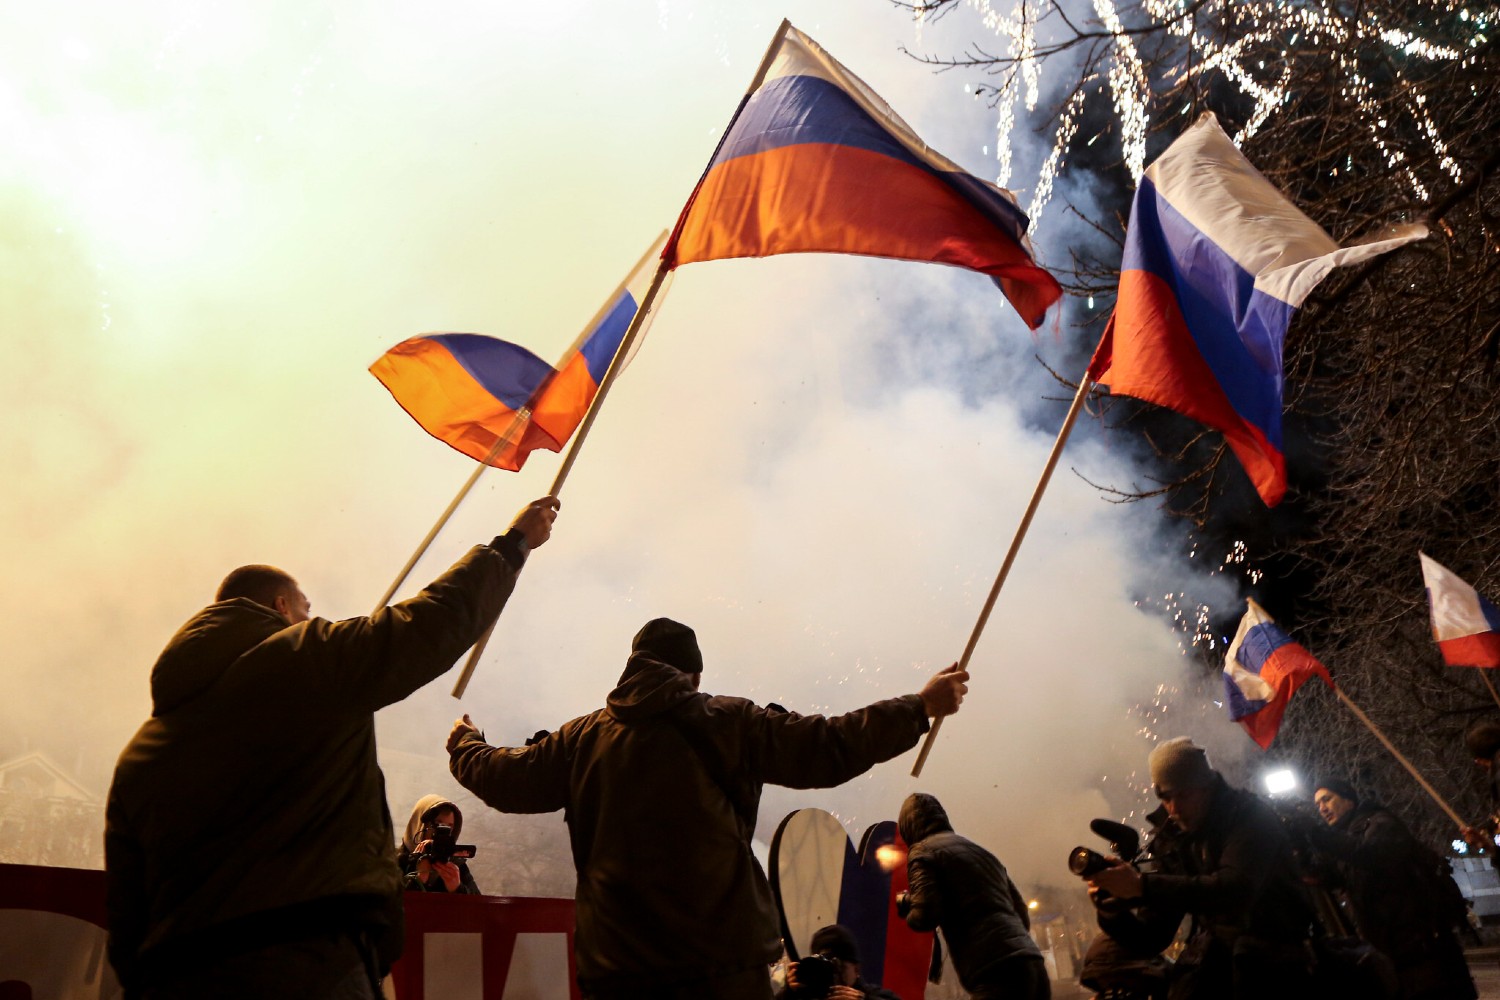 People wave Russian national flags to celebrate, in the center of Donetsk, the territory controlled by pro-Russian militants, eastern Ukraine, late Monday, Feb. 21, 2022. (AP/Alexei Alexandrov)